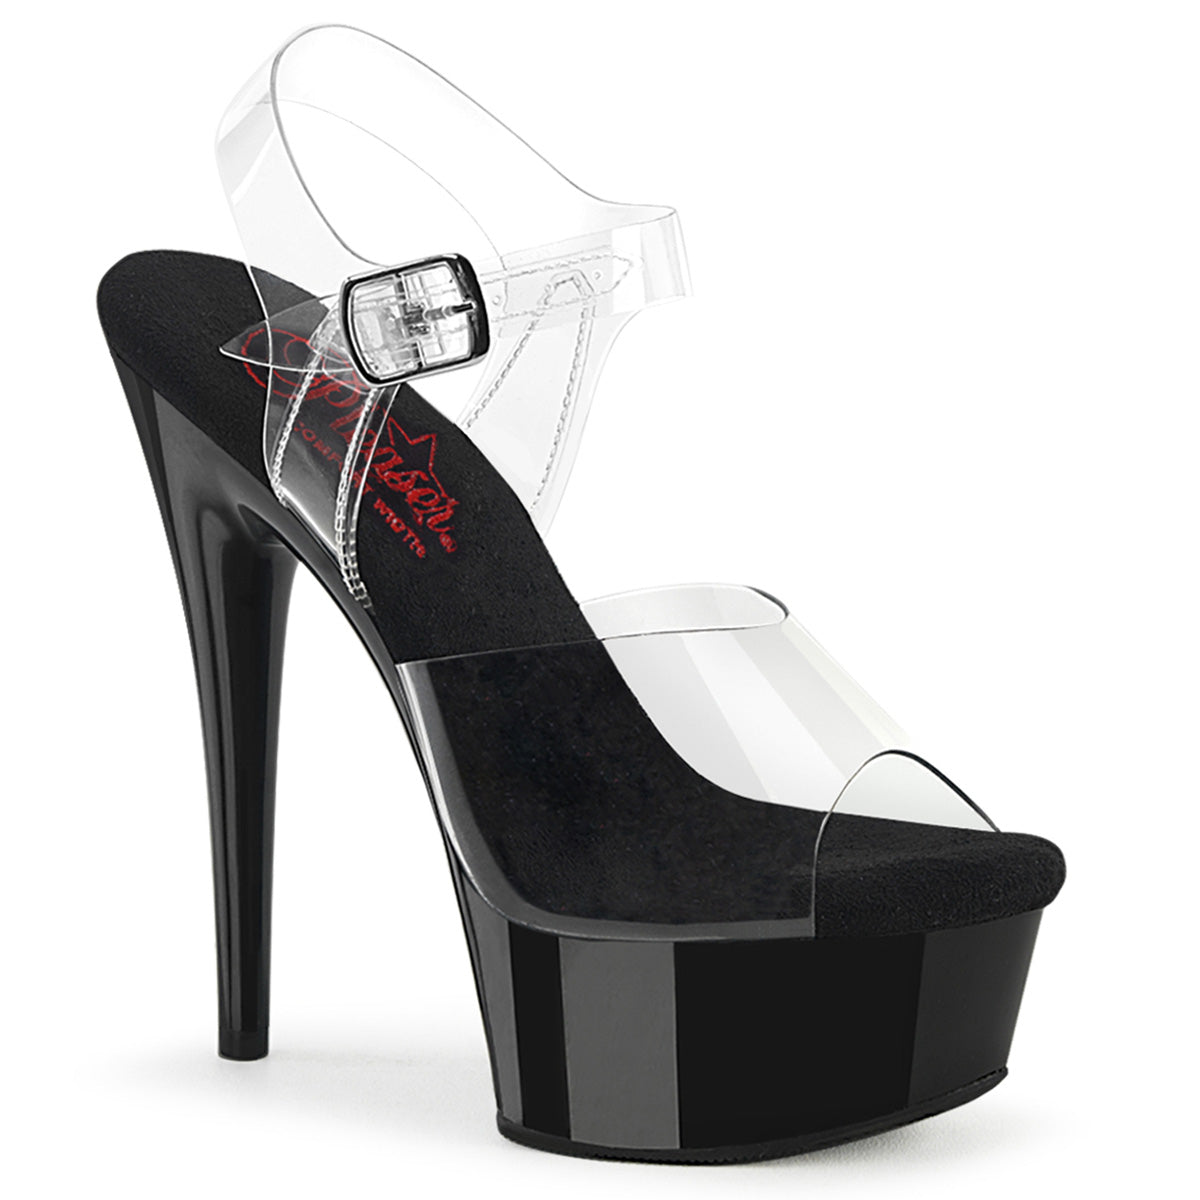 6 Inch Heel EXCITE-608 Clear Black